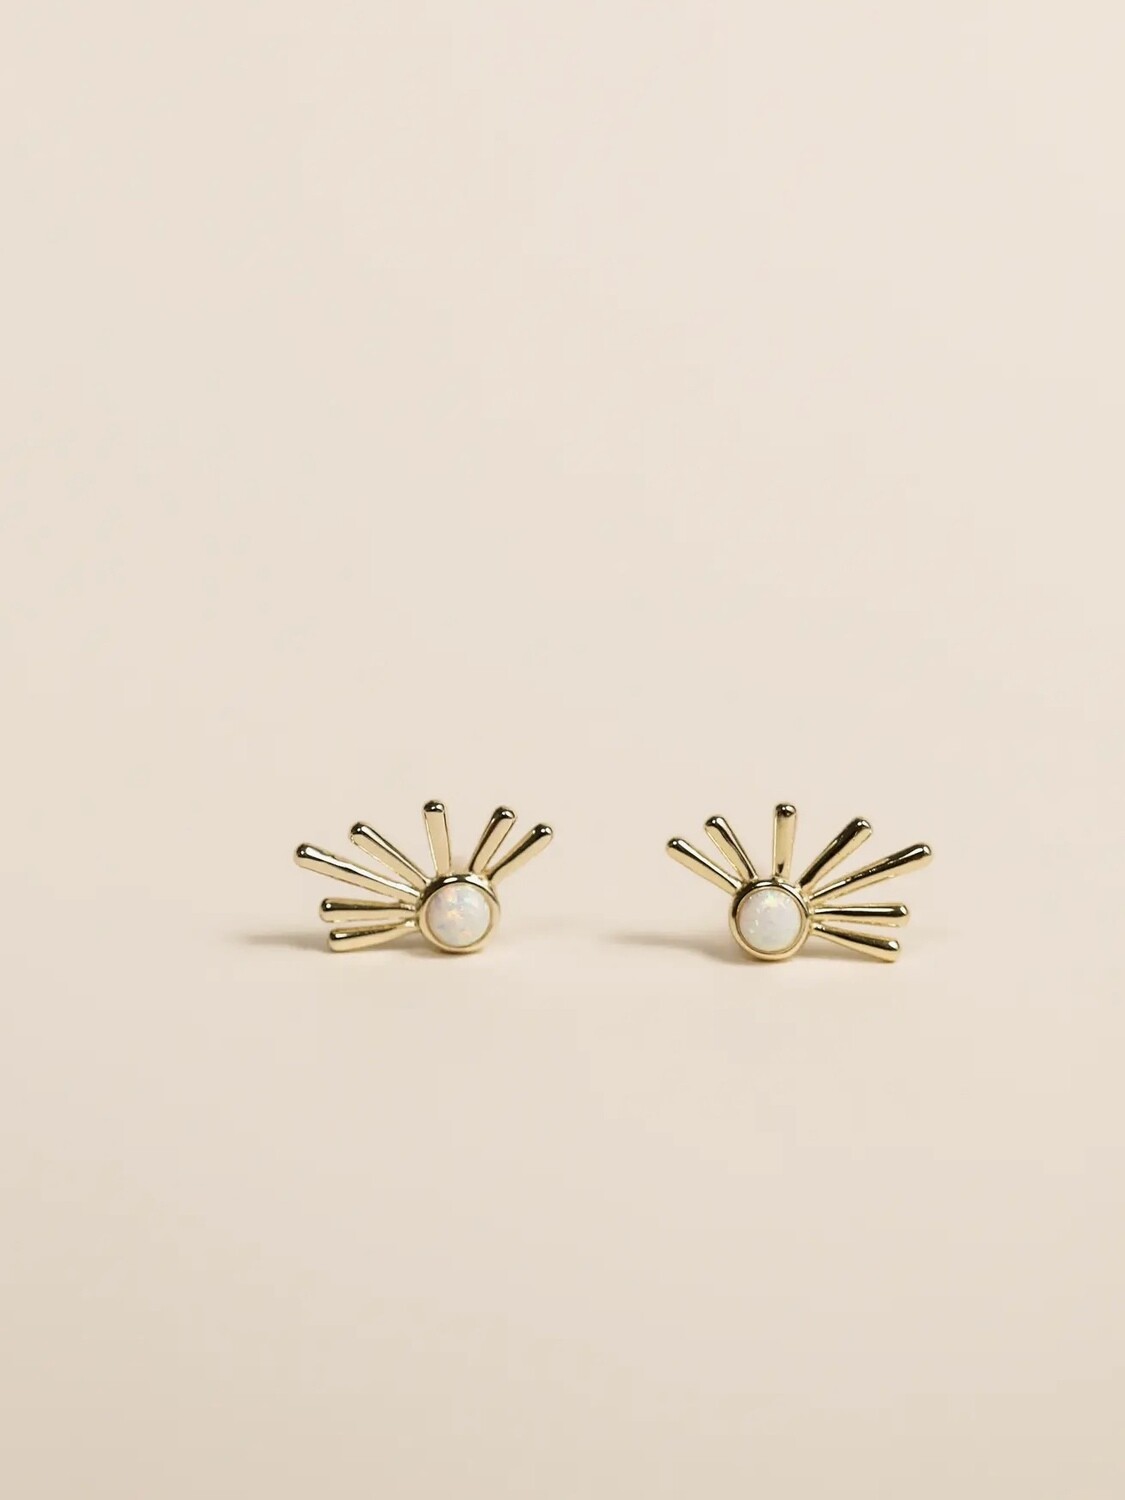 White Opalescent Sun Ray Post Earrings in 14kt Gold Over Sterling Silver - JK98